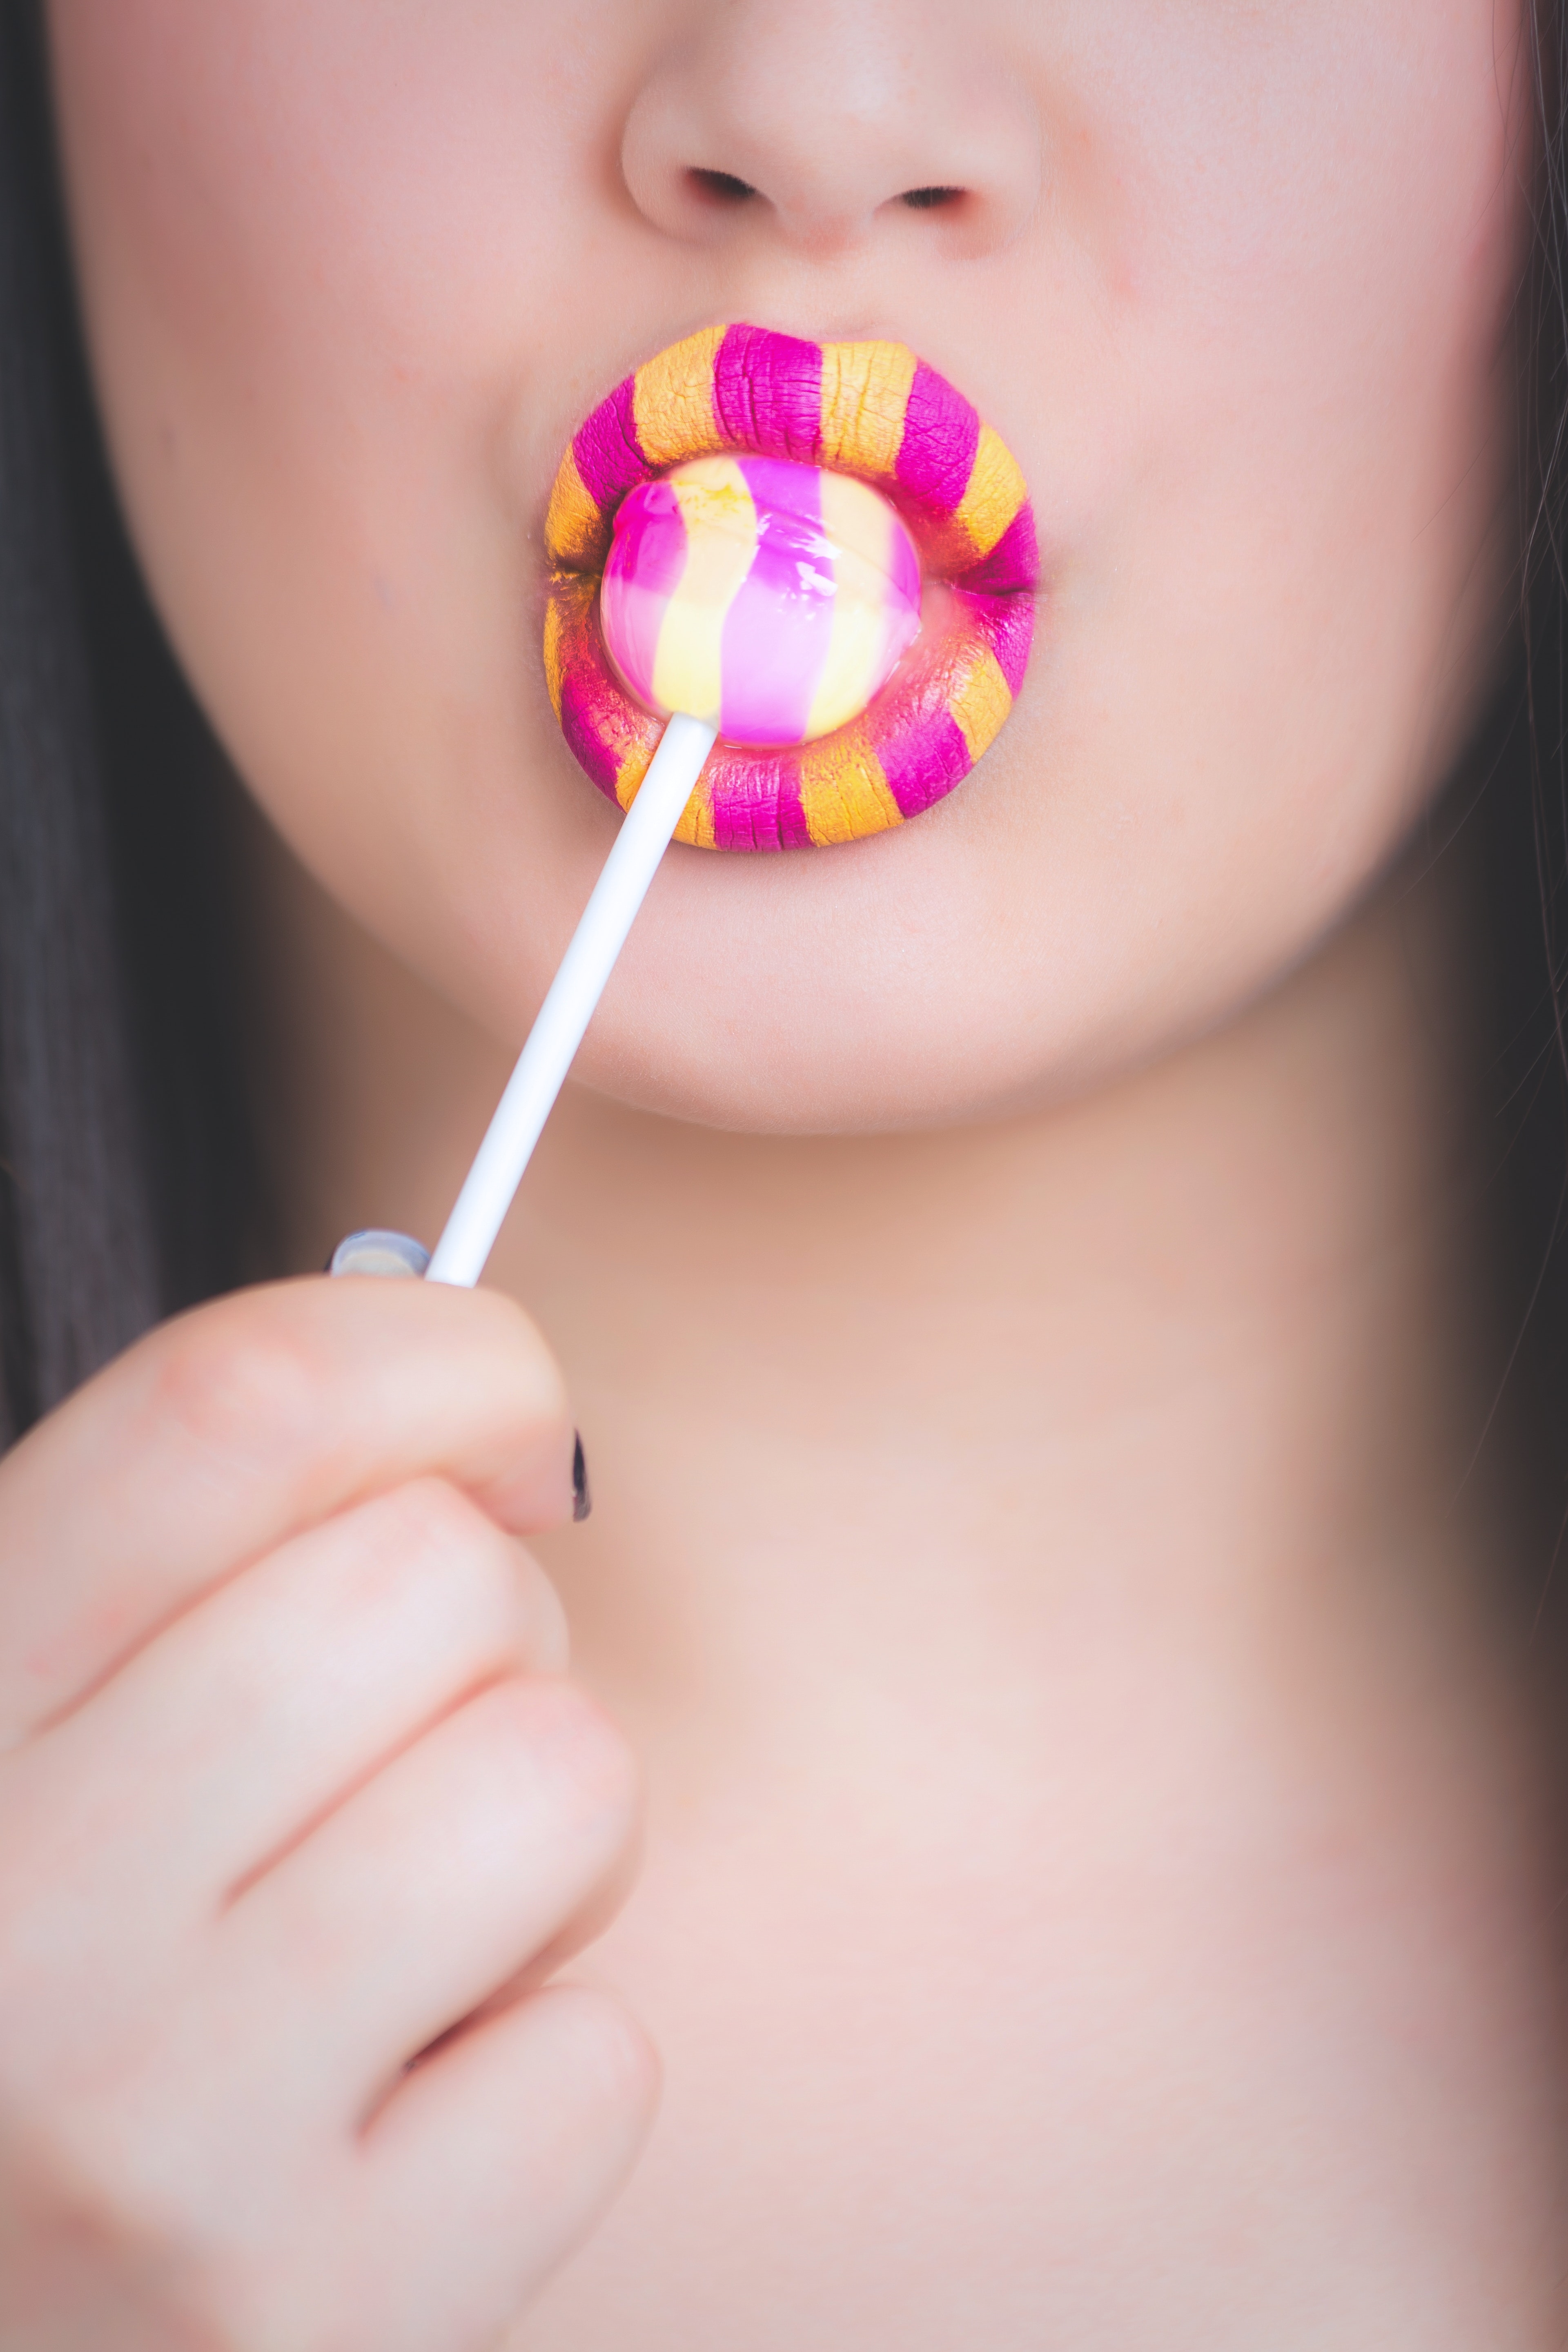 Woman with yellow and pink lipstick eating lollipop photo